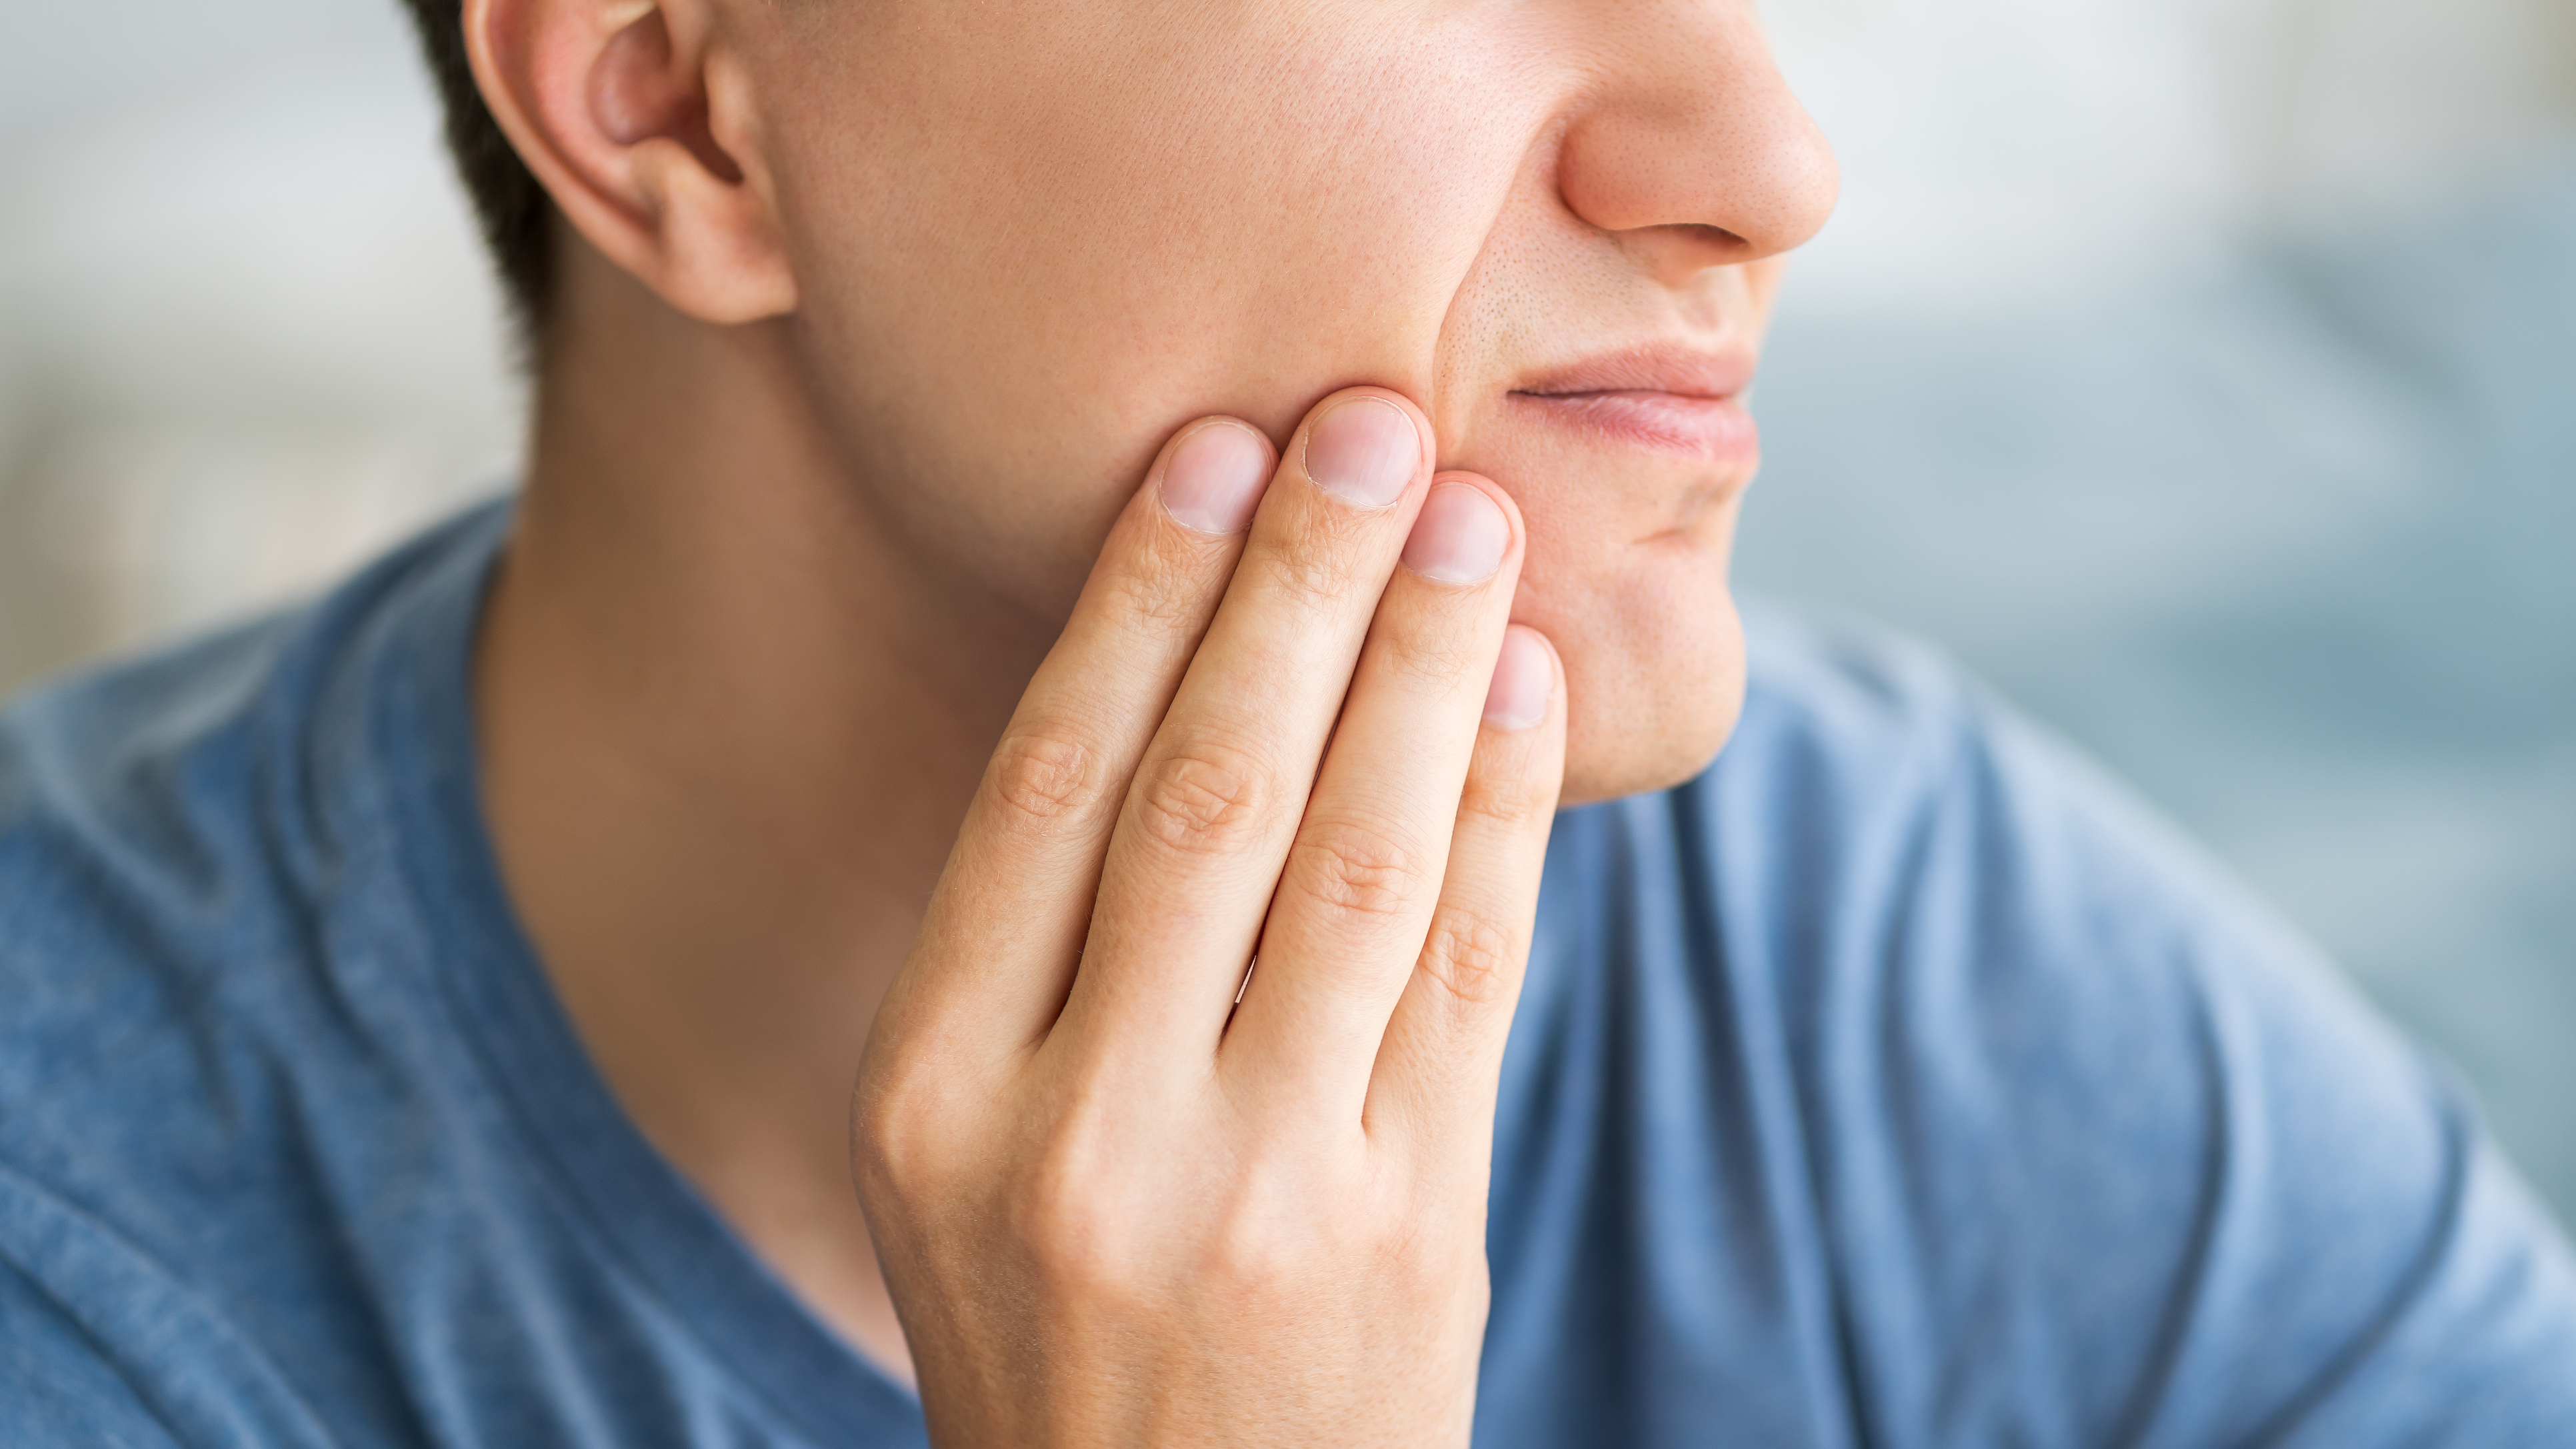 A male with his hand on his cheek having tooth pain